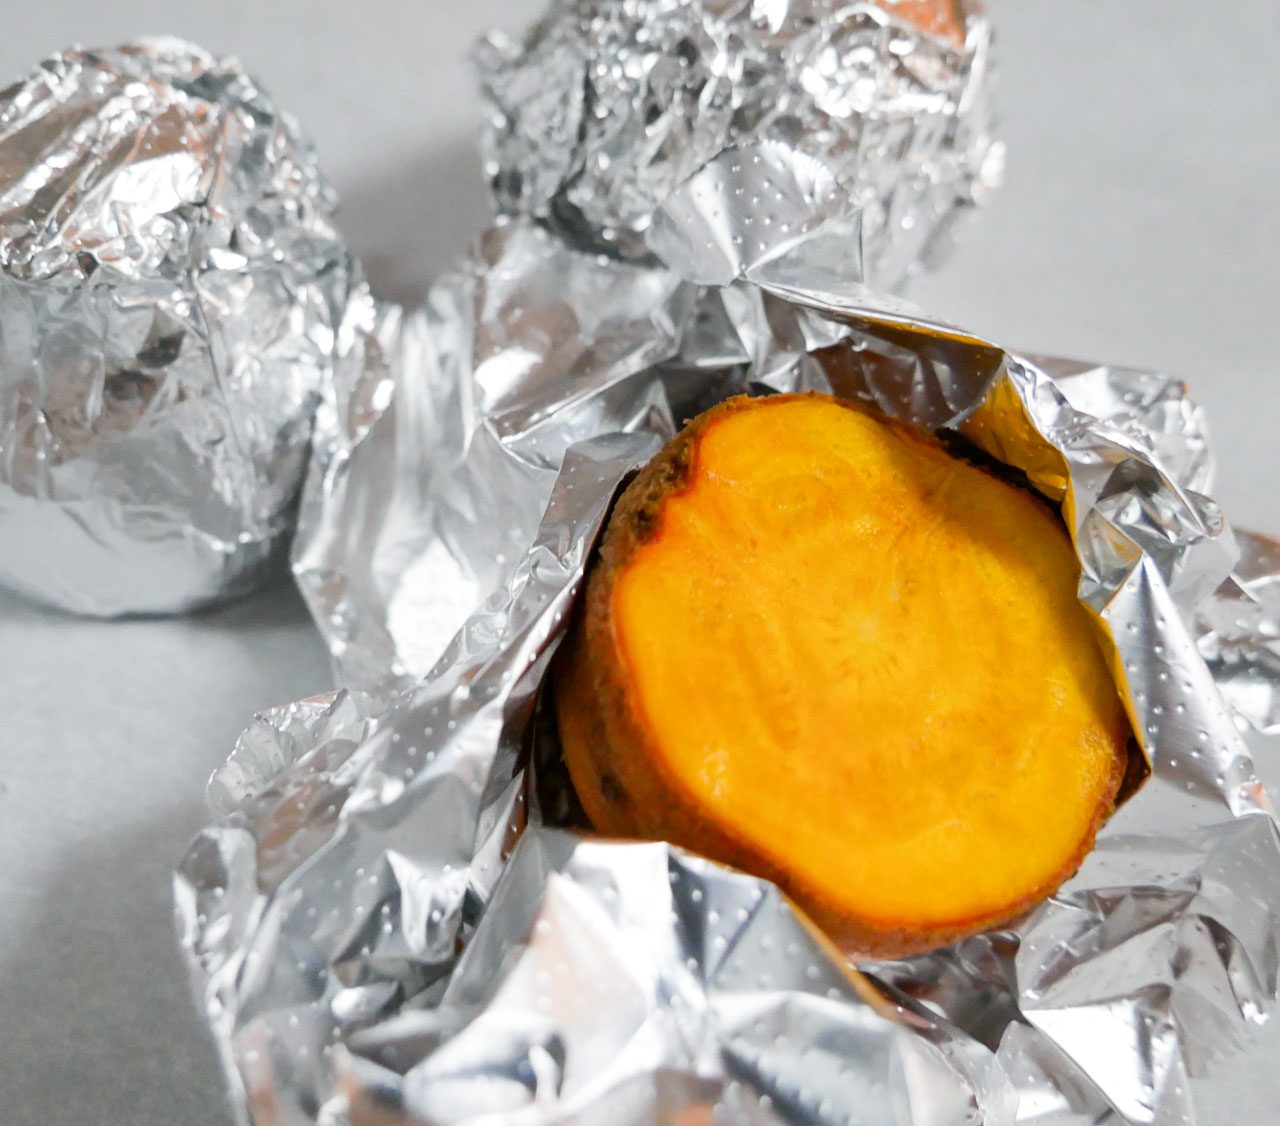 Golden beets wrapped in foil before going into oven